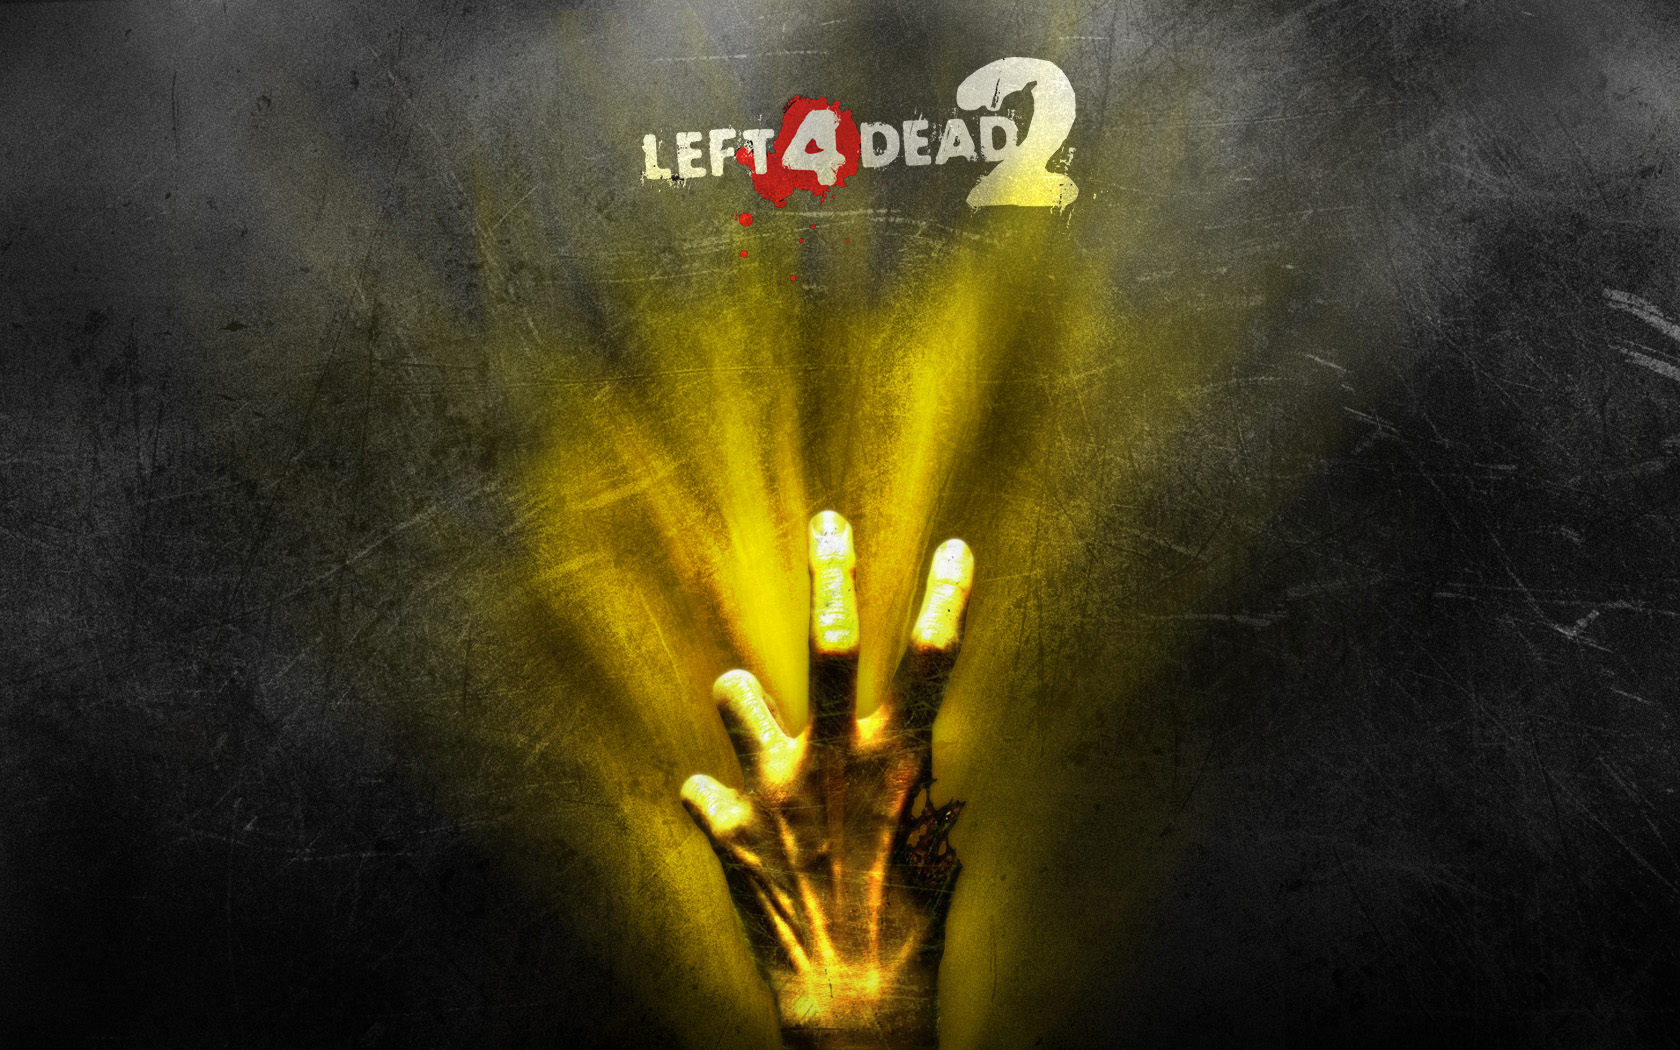 Left 4 Dead 2 For Xbox One Through BC How To Get It